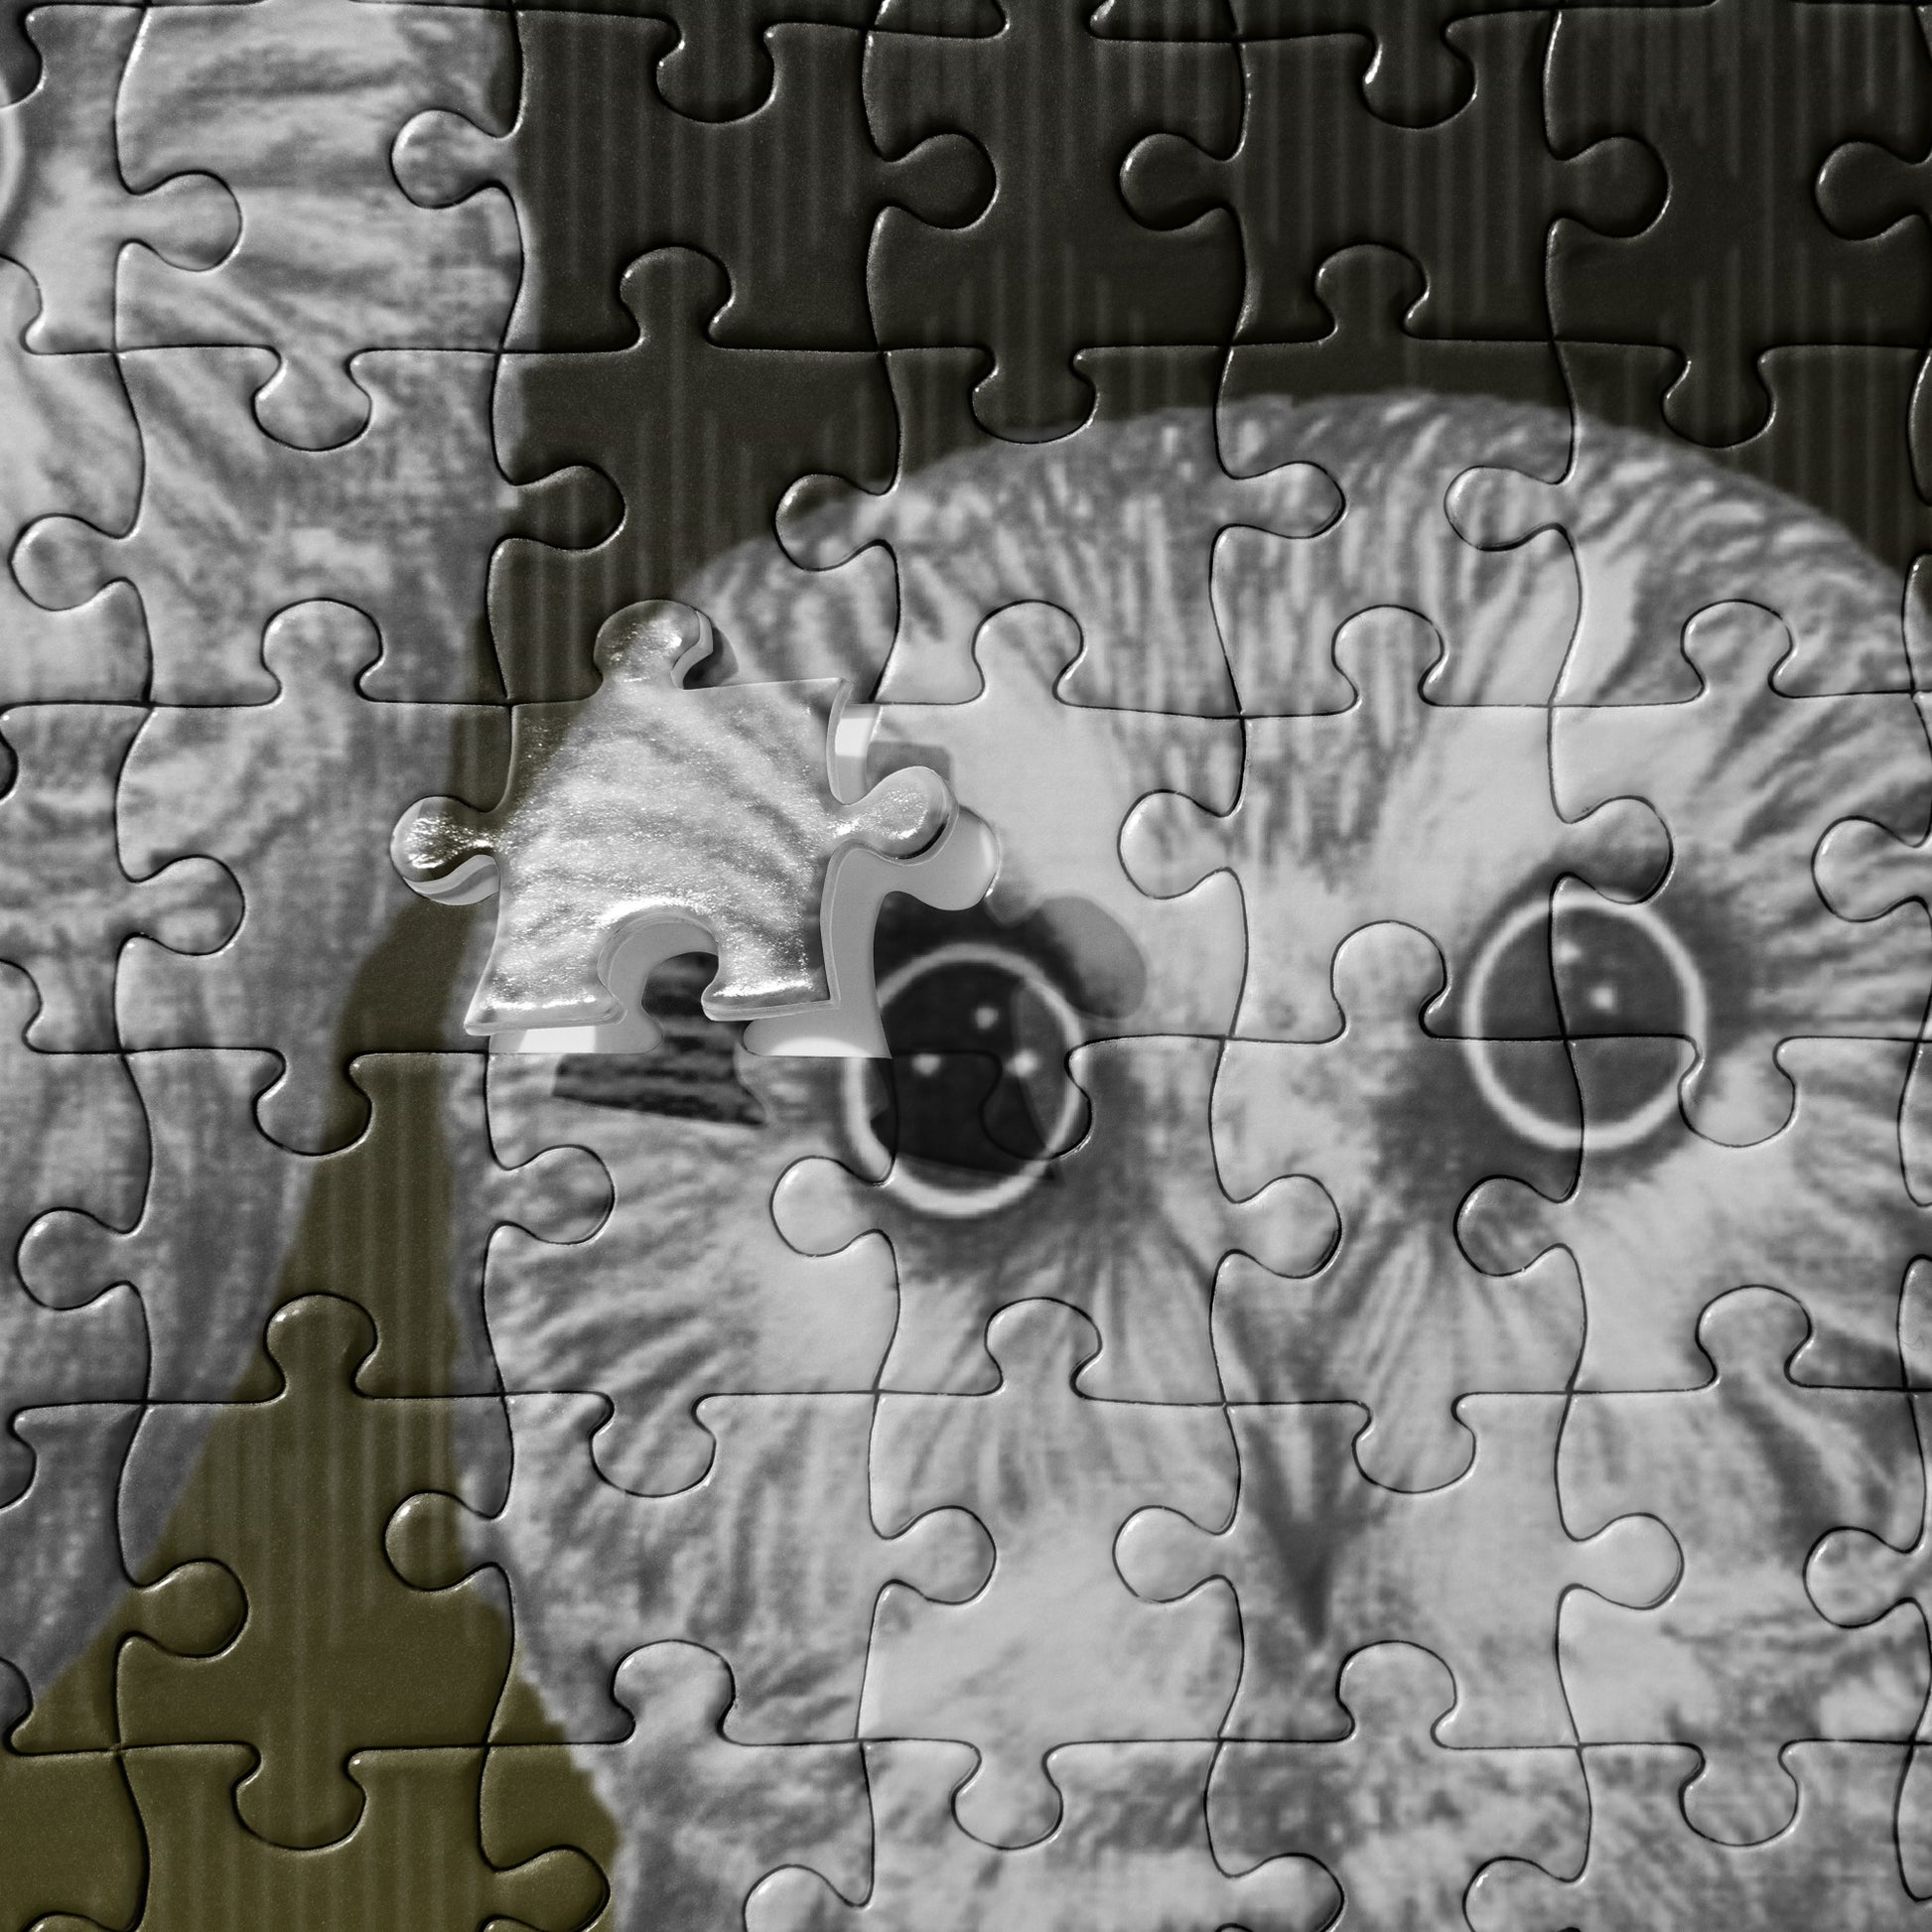 This "Owl Jigsaw Puzzle" is from a drawing of mine created with a graphite pencil. it has been digitally optimized and transferred to a pressed paper chipboad which makes it suitable for framing.